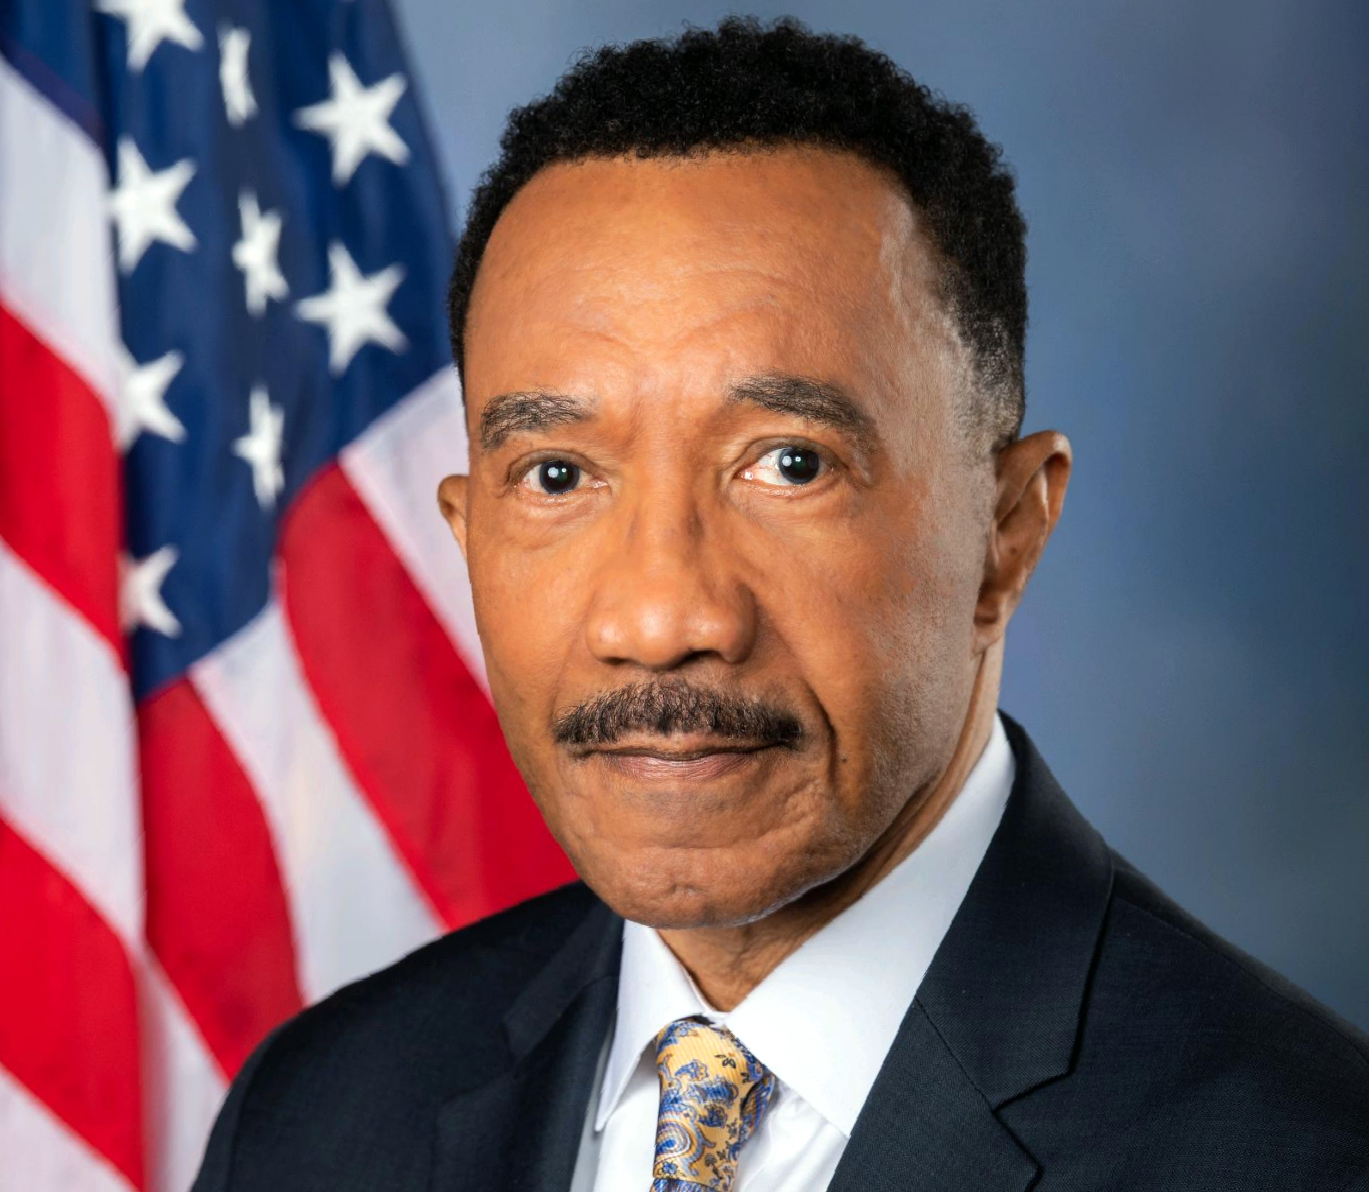 Rep. Kweisi Mfume on the House Speaker Fight, MLK Day events